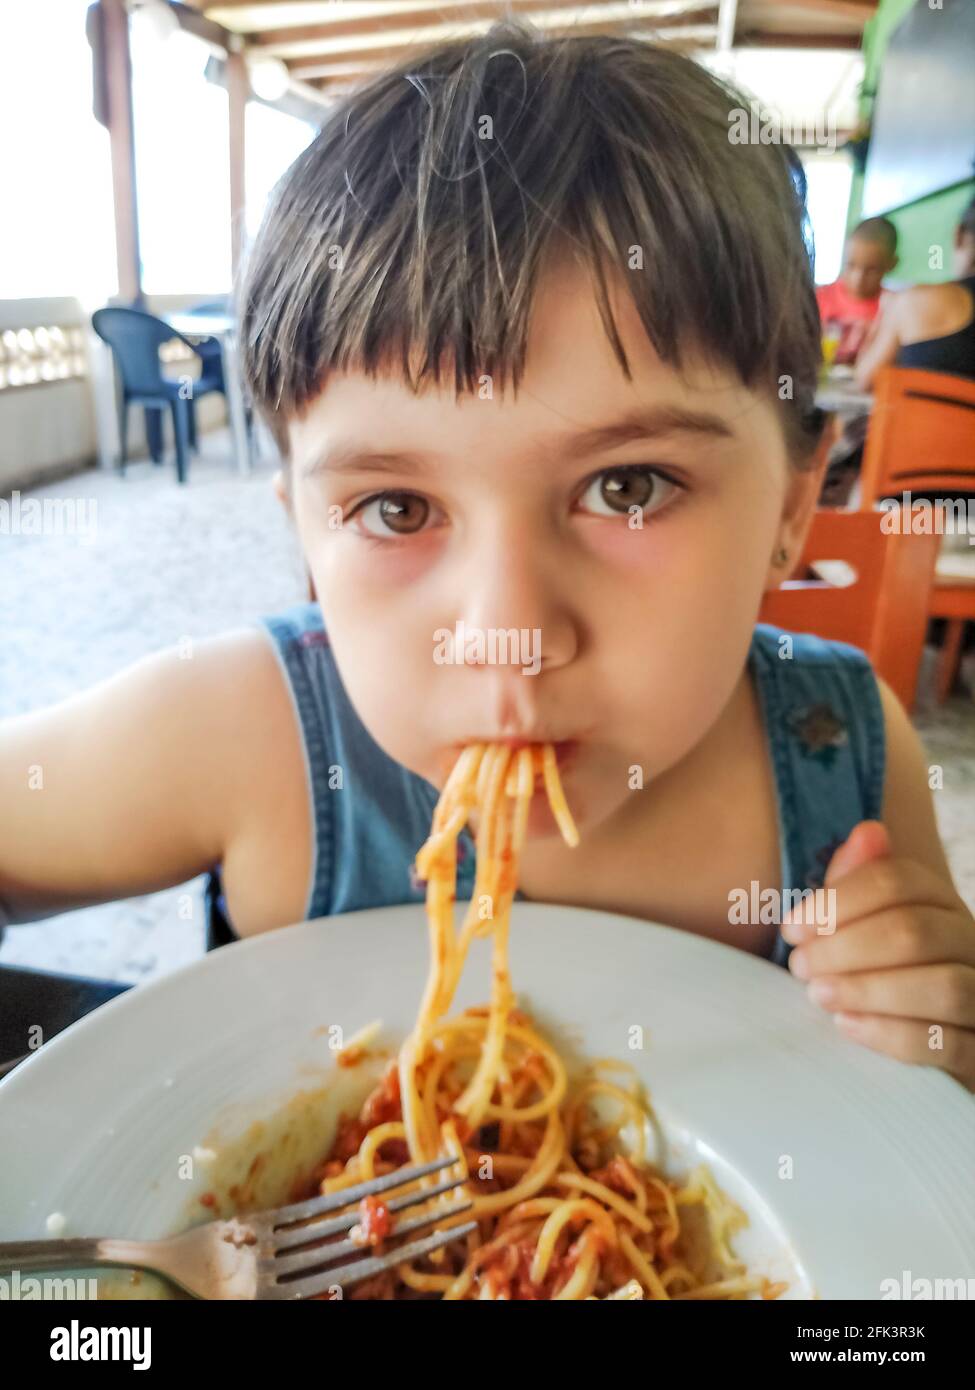 Little girl eating spaghetti in a really untidy manner Stock Photo